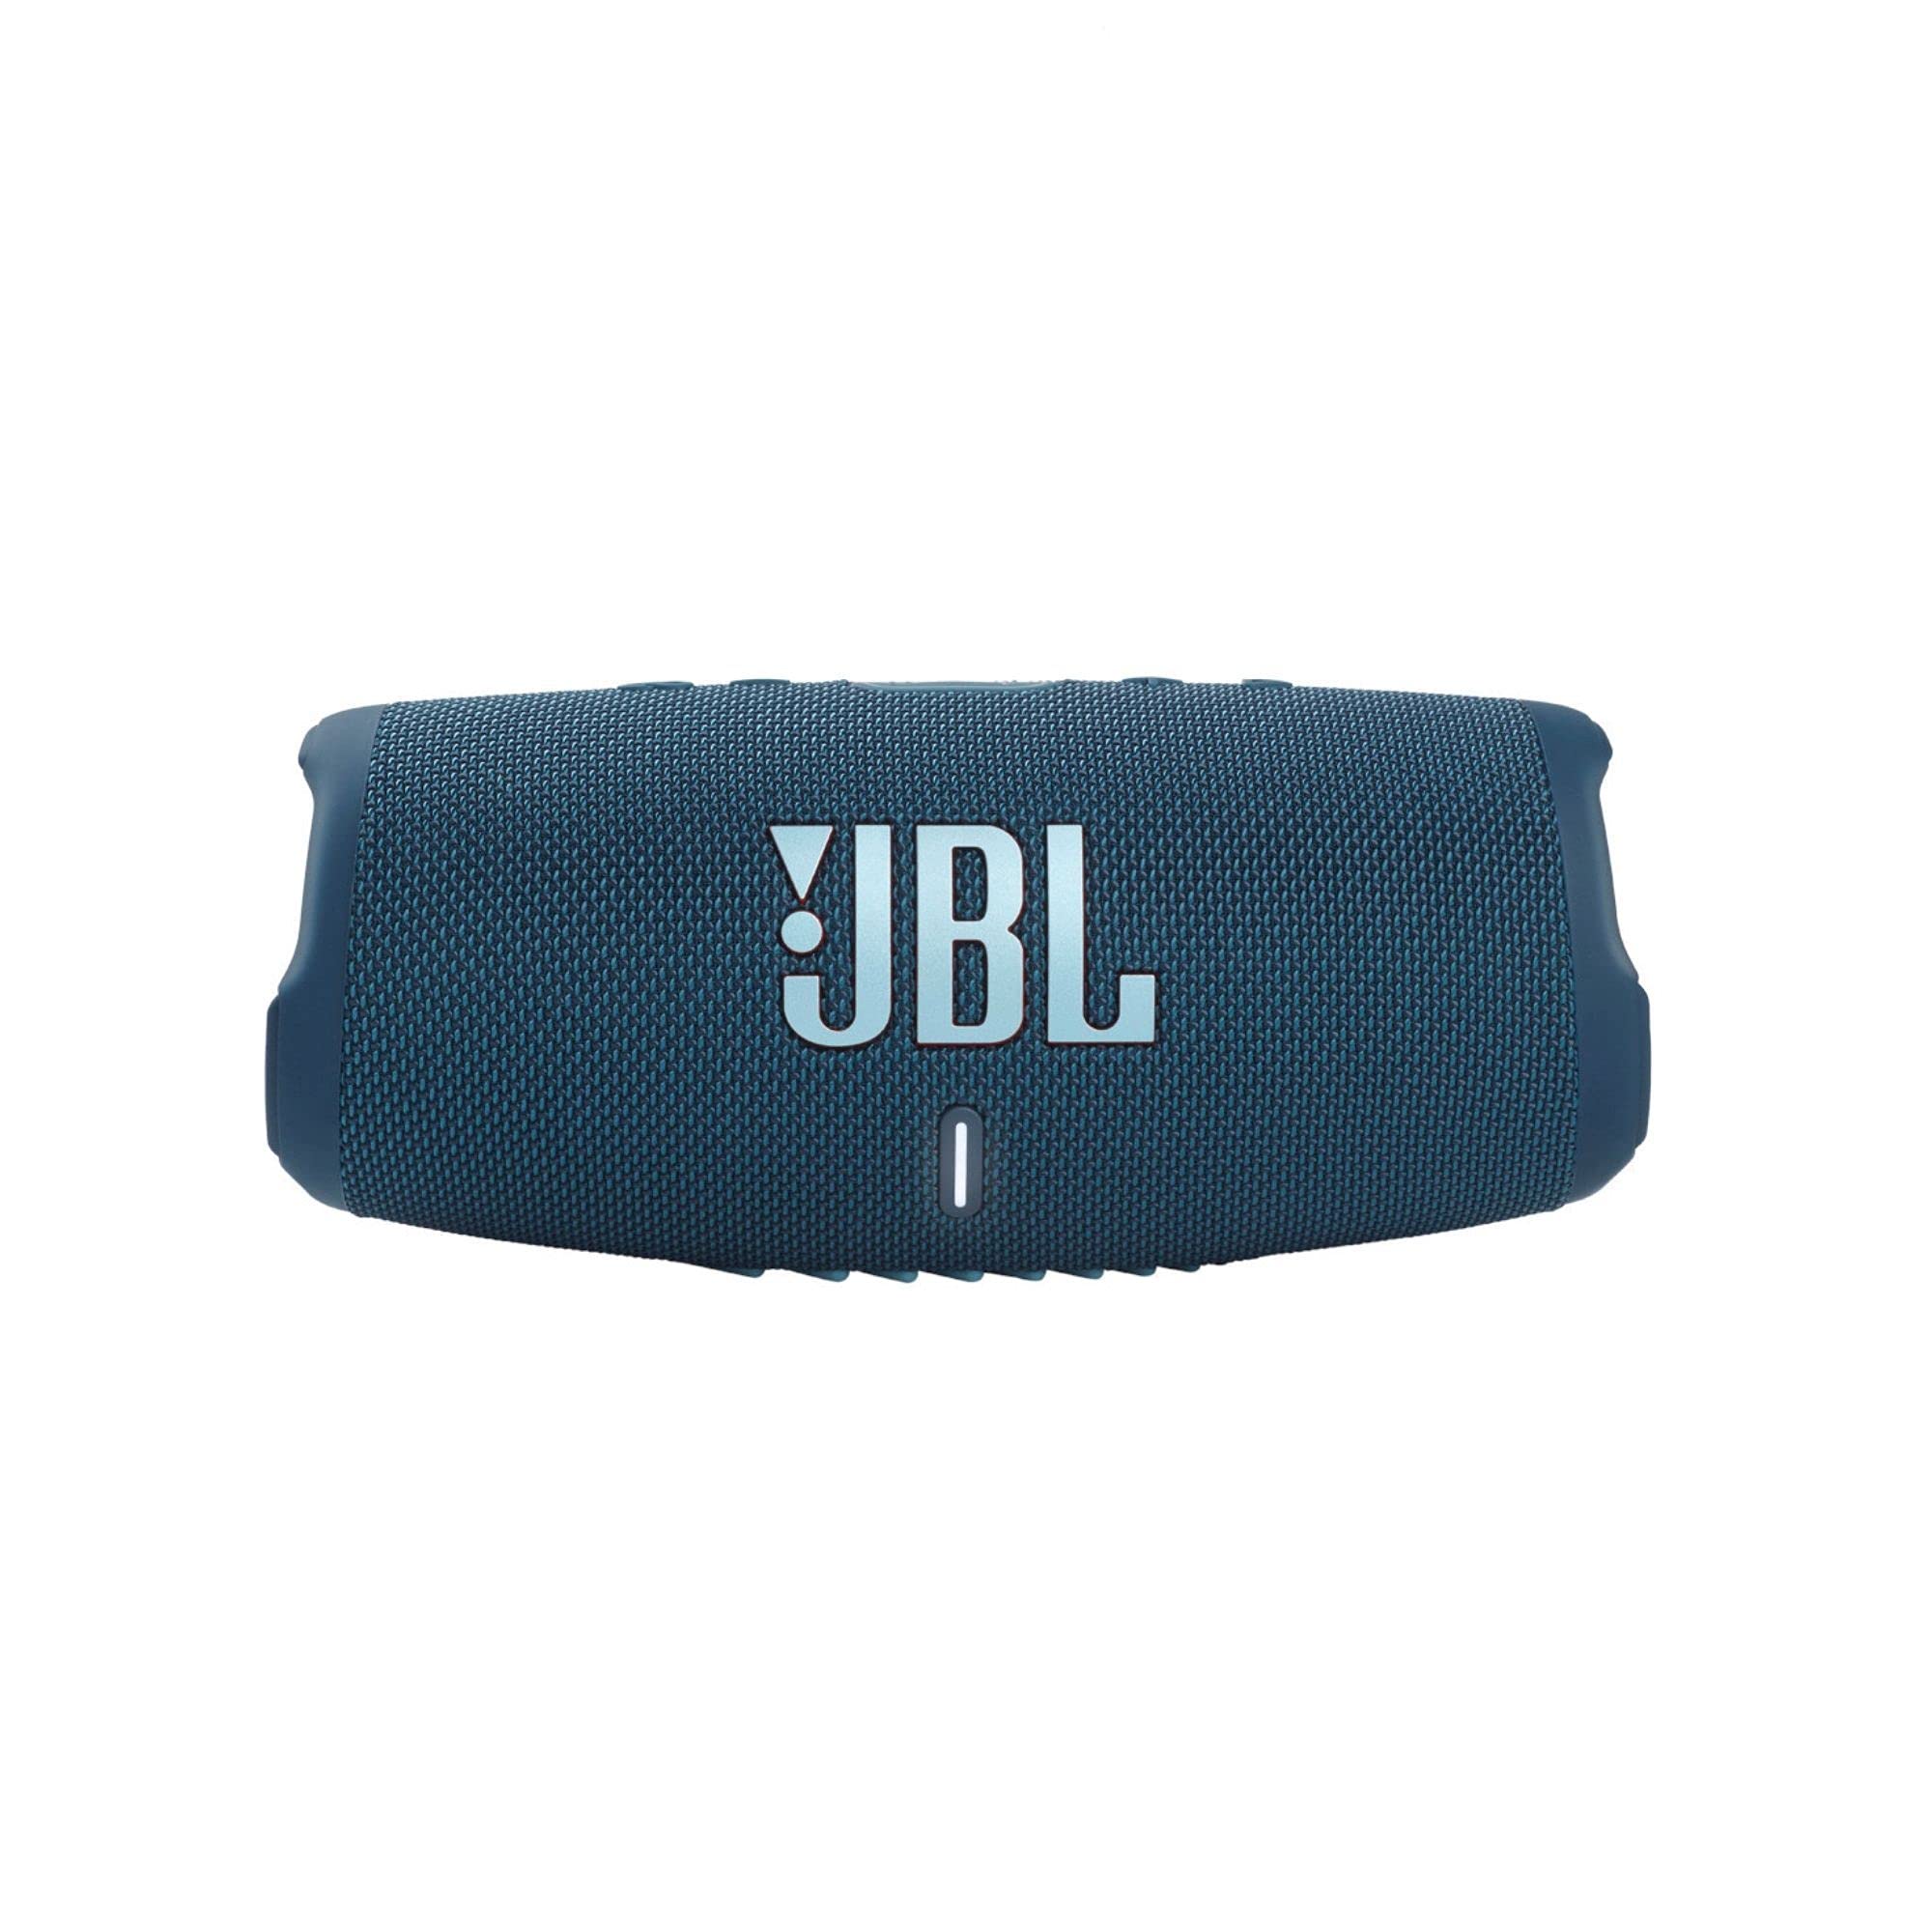 JBL Charge 5 - Portable Bluetooth Speaker with IP67 Wat...